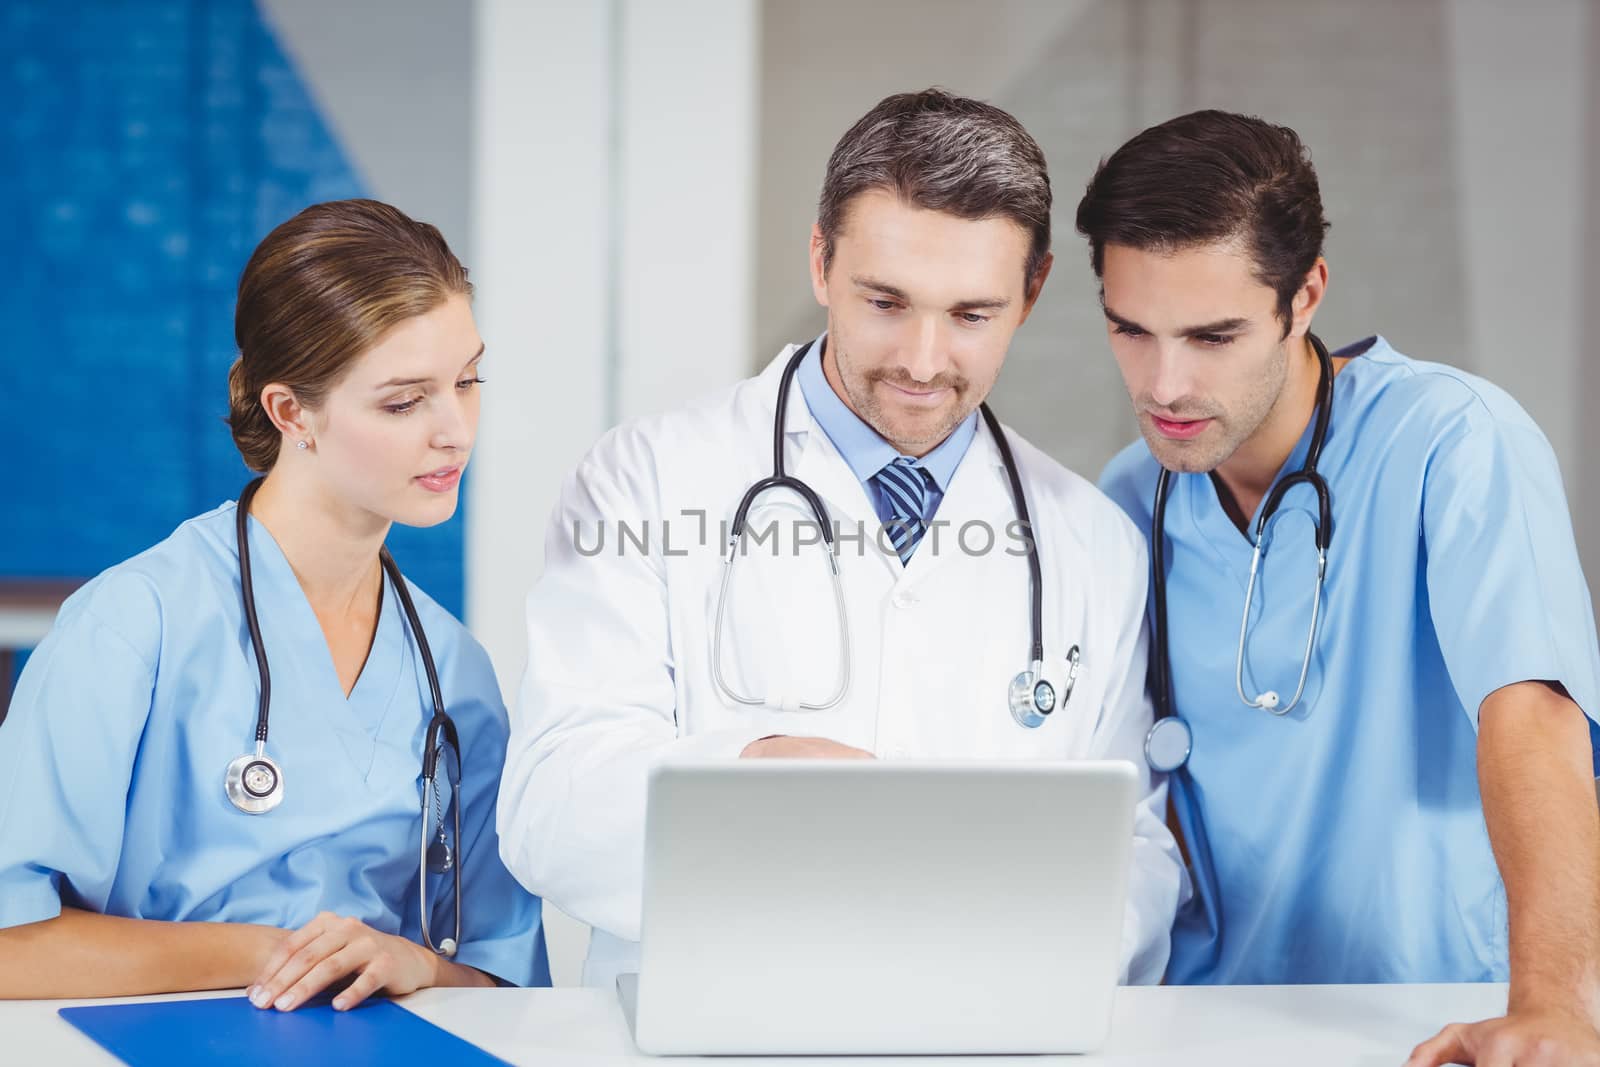 Concentrated doctors using laptop while standing at desk in hospital